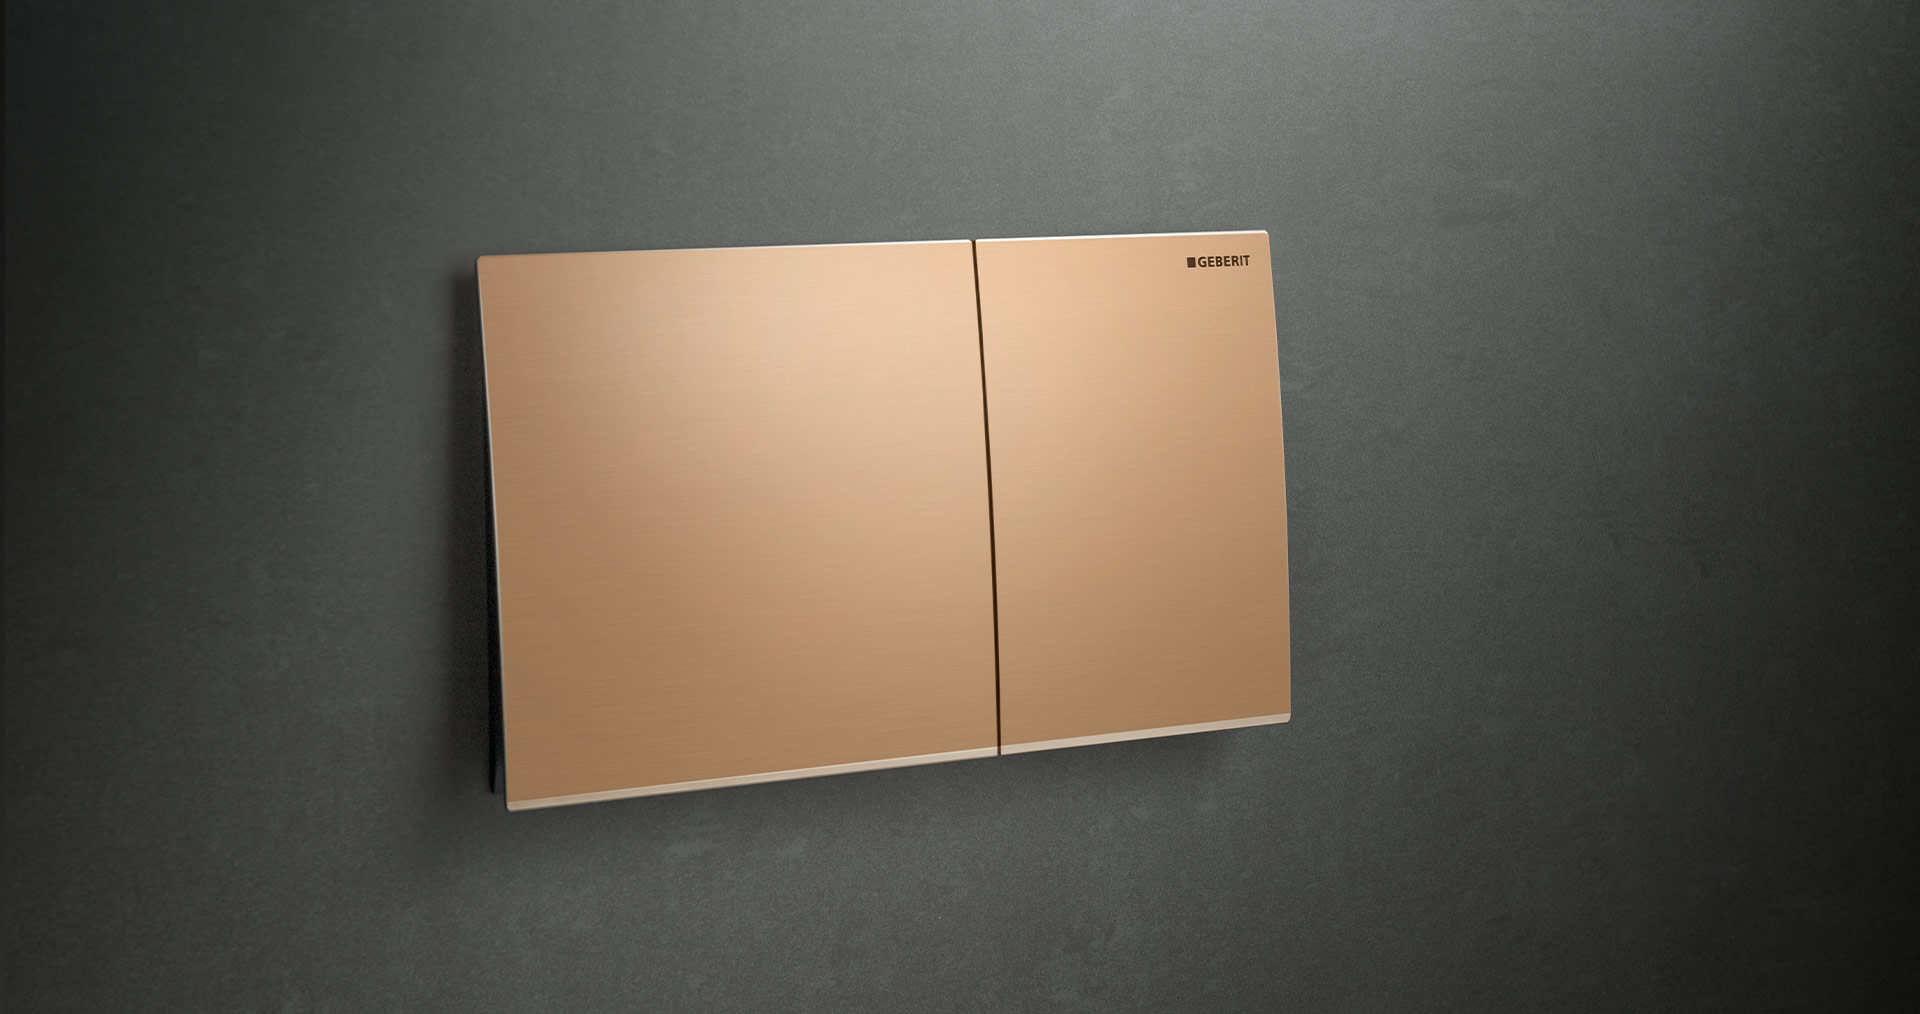 Geberit Sigma70 toilet flush plate in frameless design and bronze color, seemingly floating mounted on a dark background